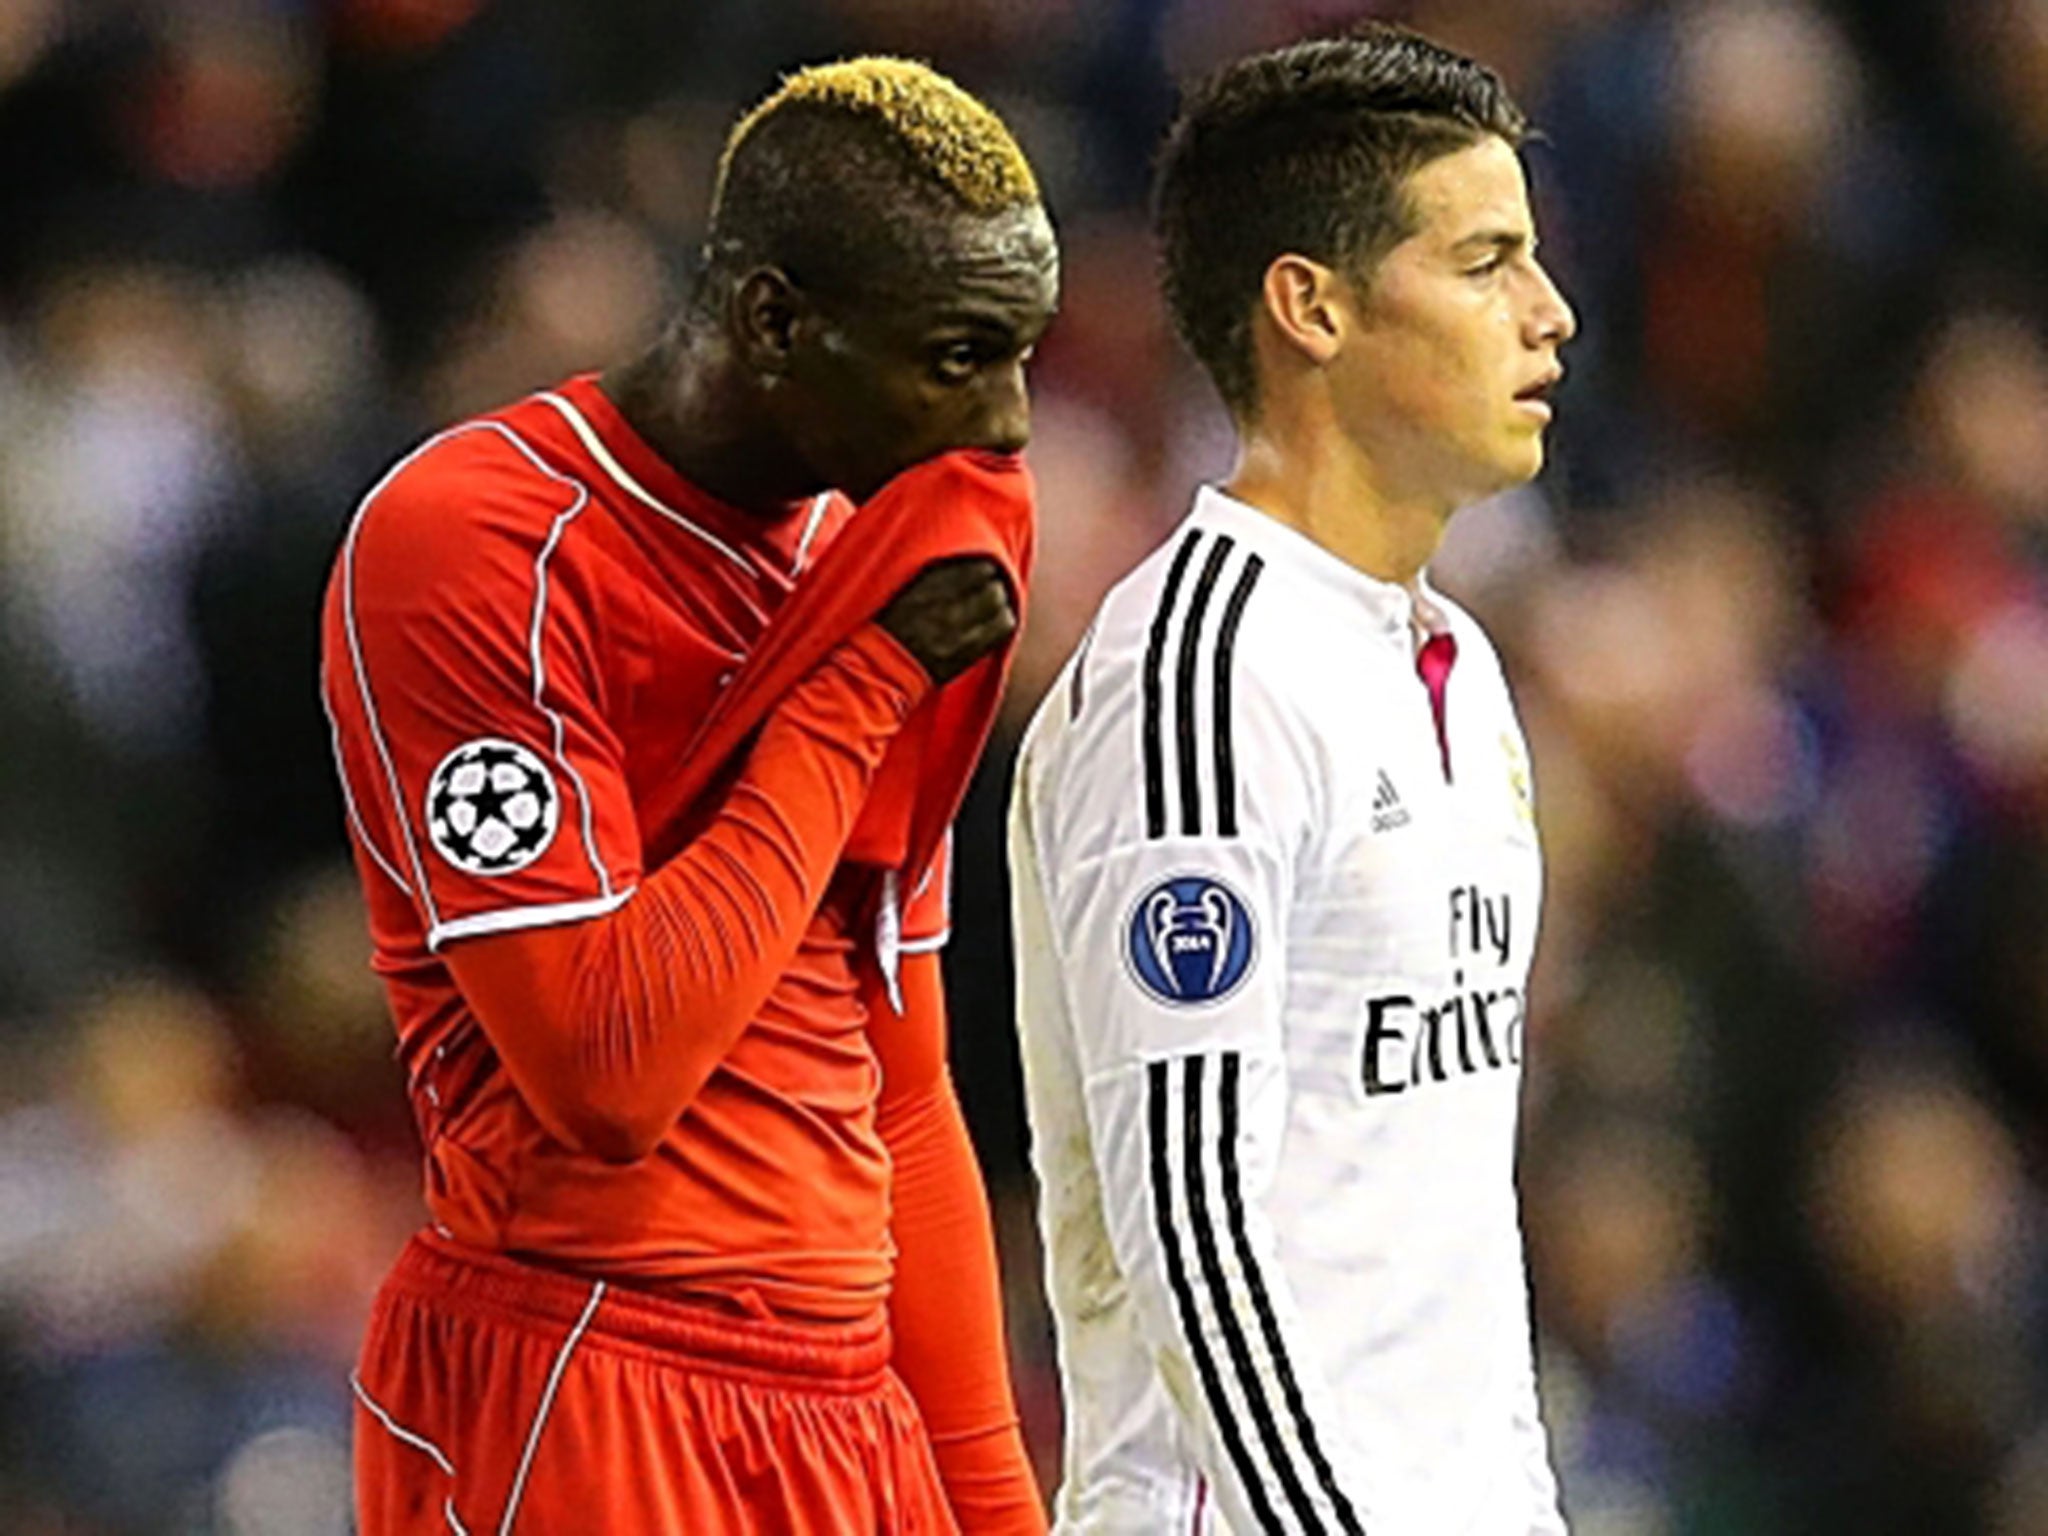 Mario Balotelli (left) trudges off at  half-time last night, to be substituted during the interval